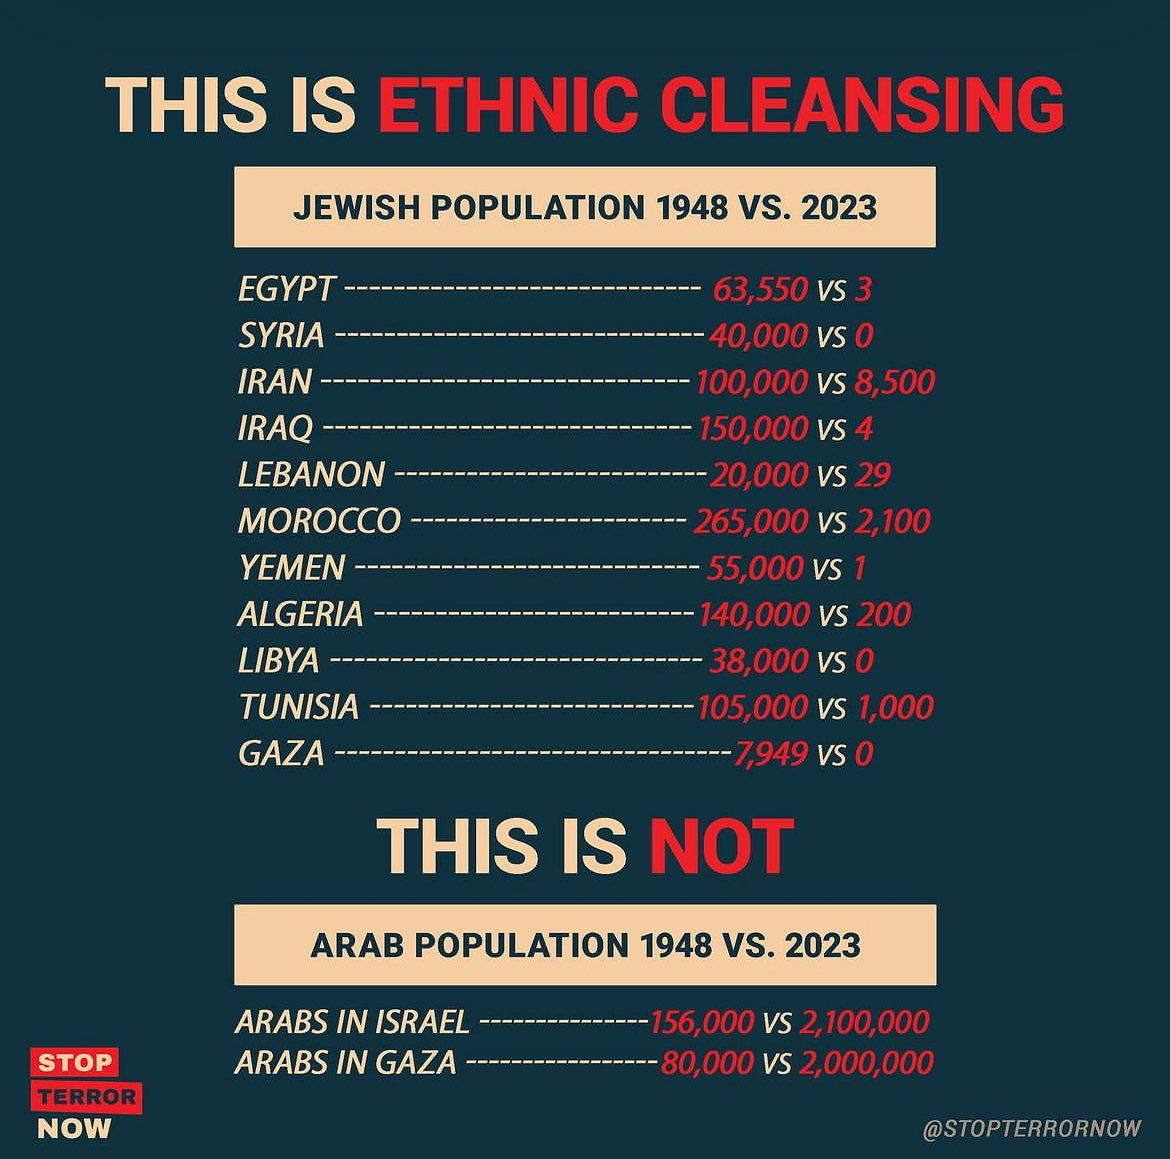 Ethnic Cleansing in Israel and Muslim Countries from 1948 to 2023